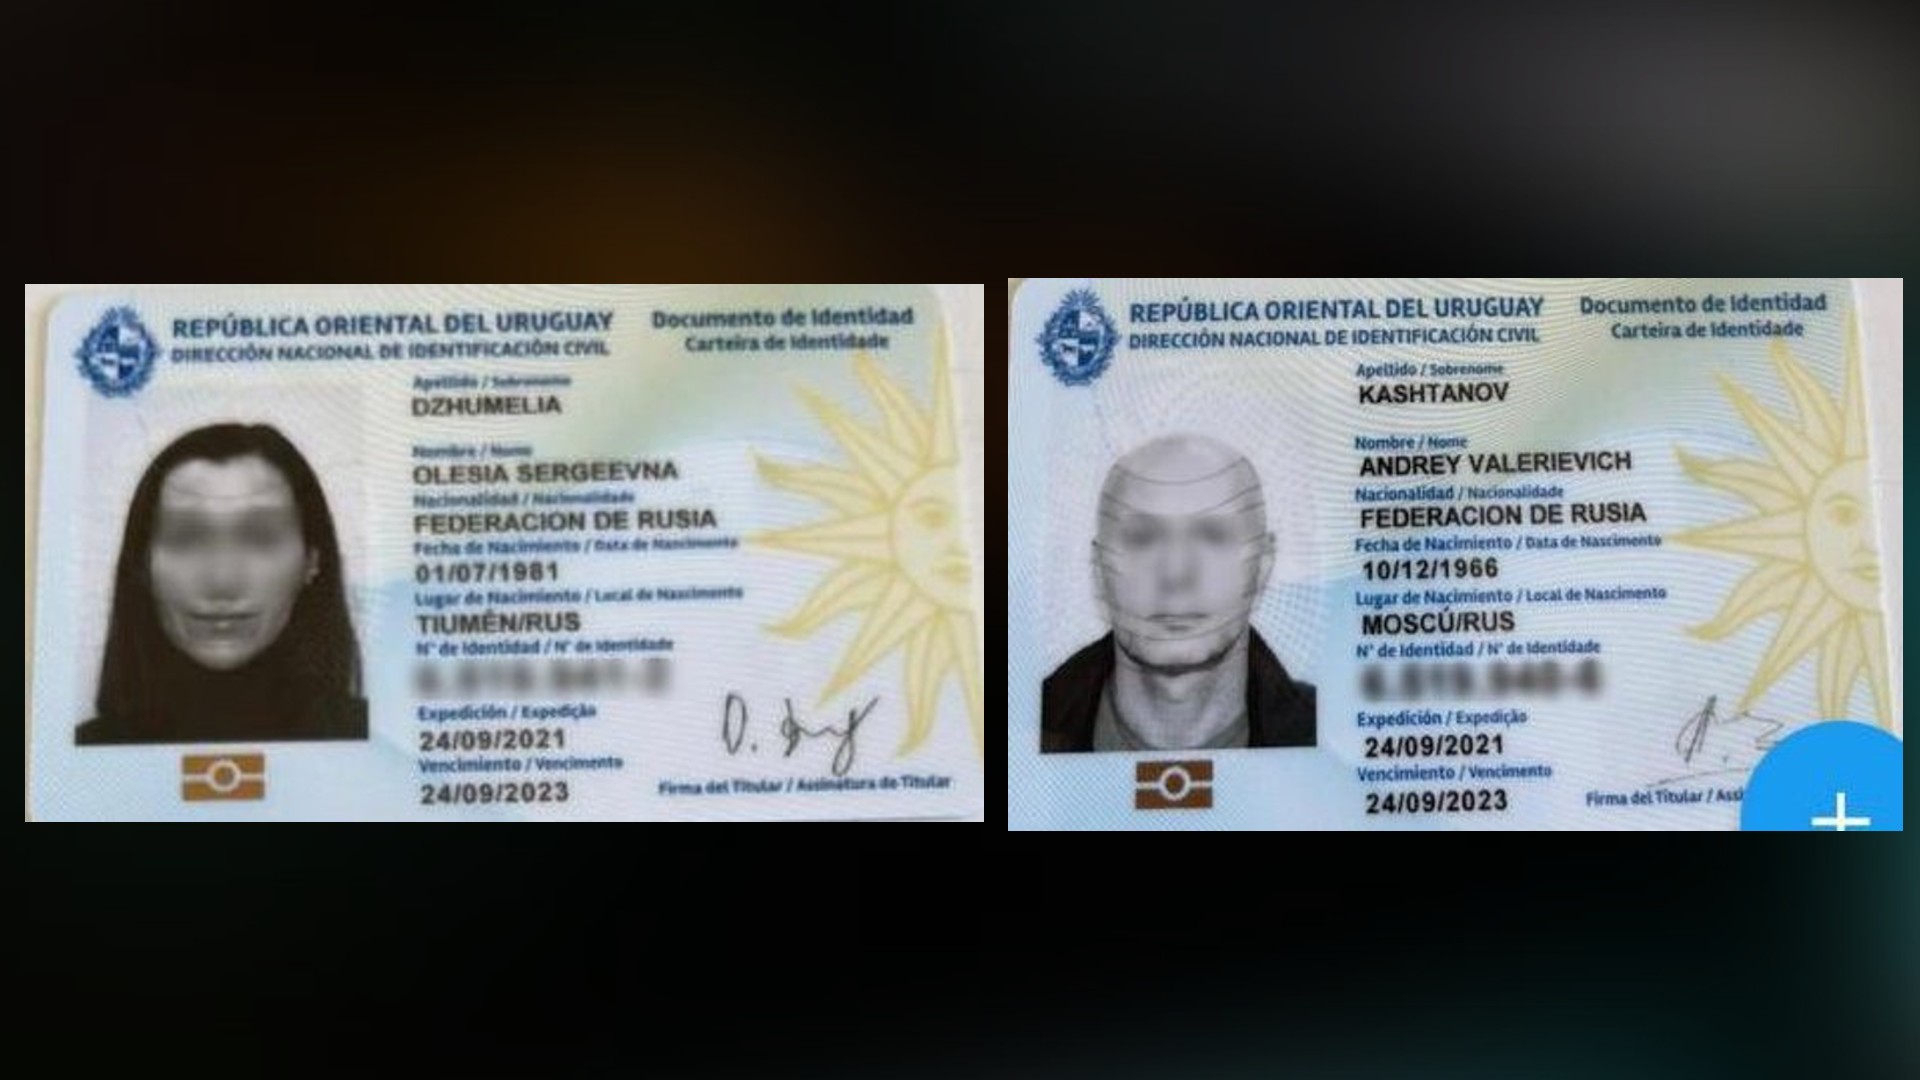 Certificates of the two Russian nationals, who entered by authorization of Álvaro Delgado.